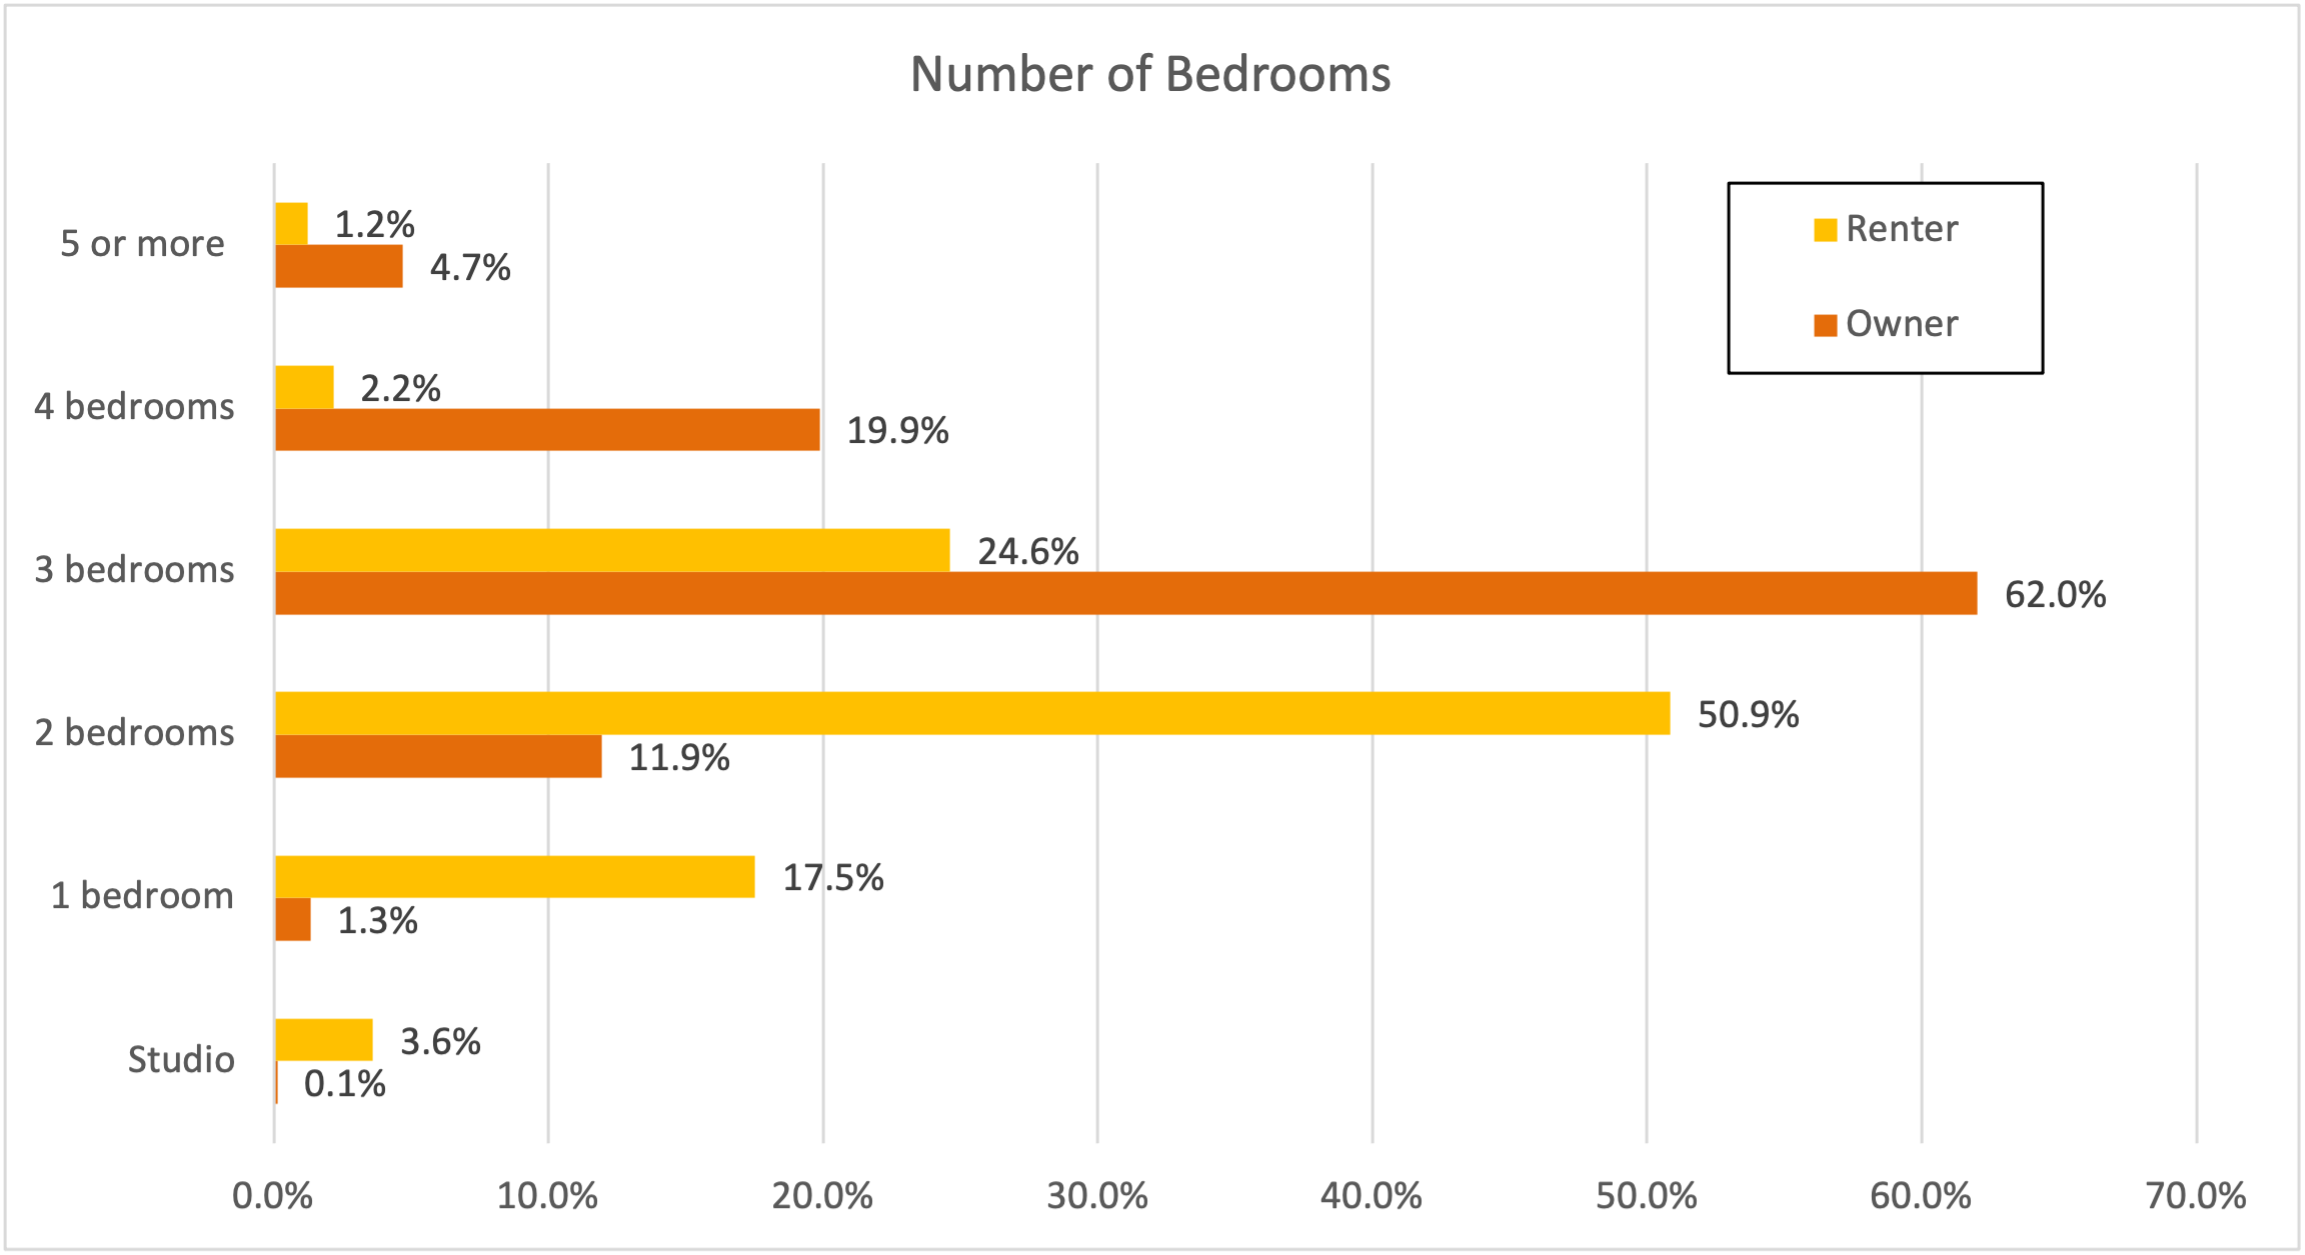 chart showing number of bedrooms by tenure